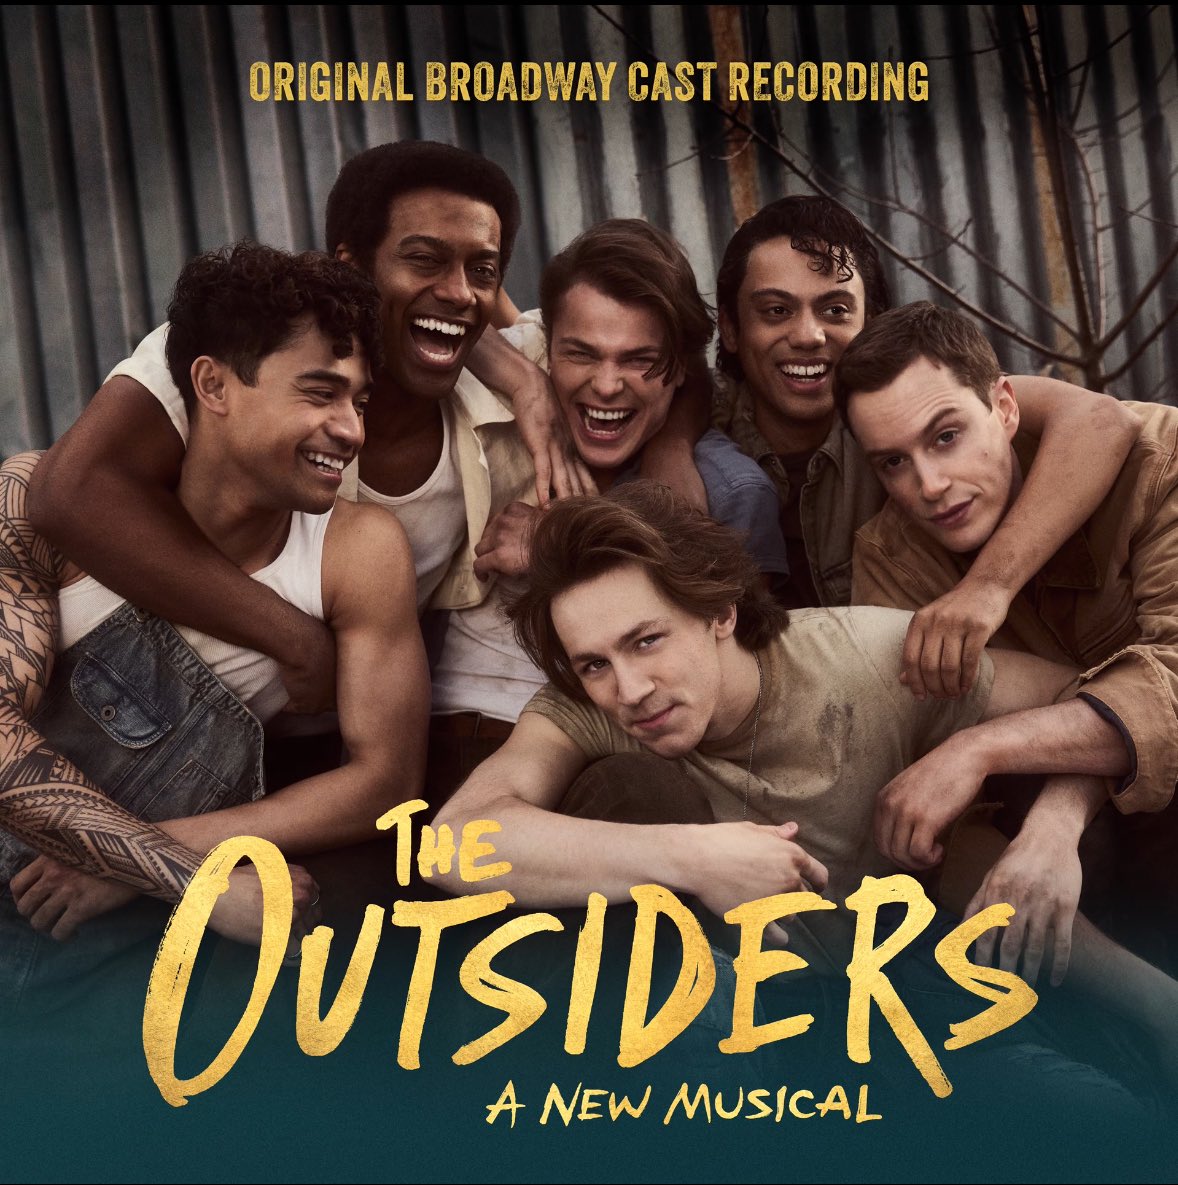 There’s just one thing you need to know: The Outsiders Original Broadway Cast Recording comes out next Wednesday May 22nd! You can now pre-save/pre-add on Spotify and Apple Music. theoutsidersbroadway.lnk.to/castalbumWL